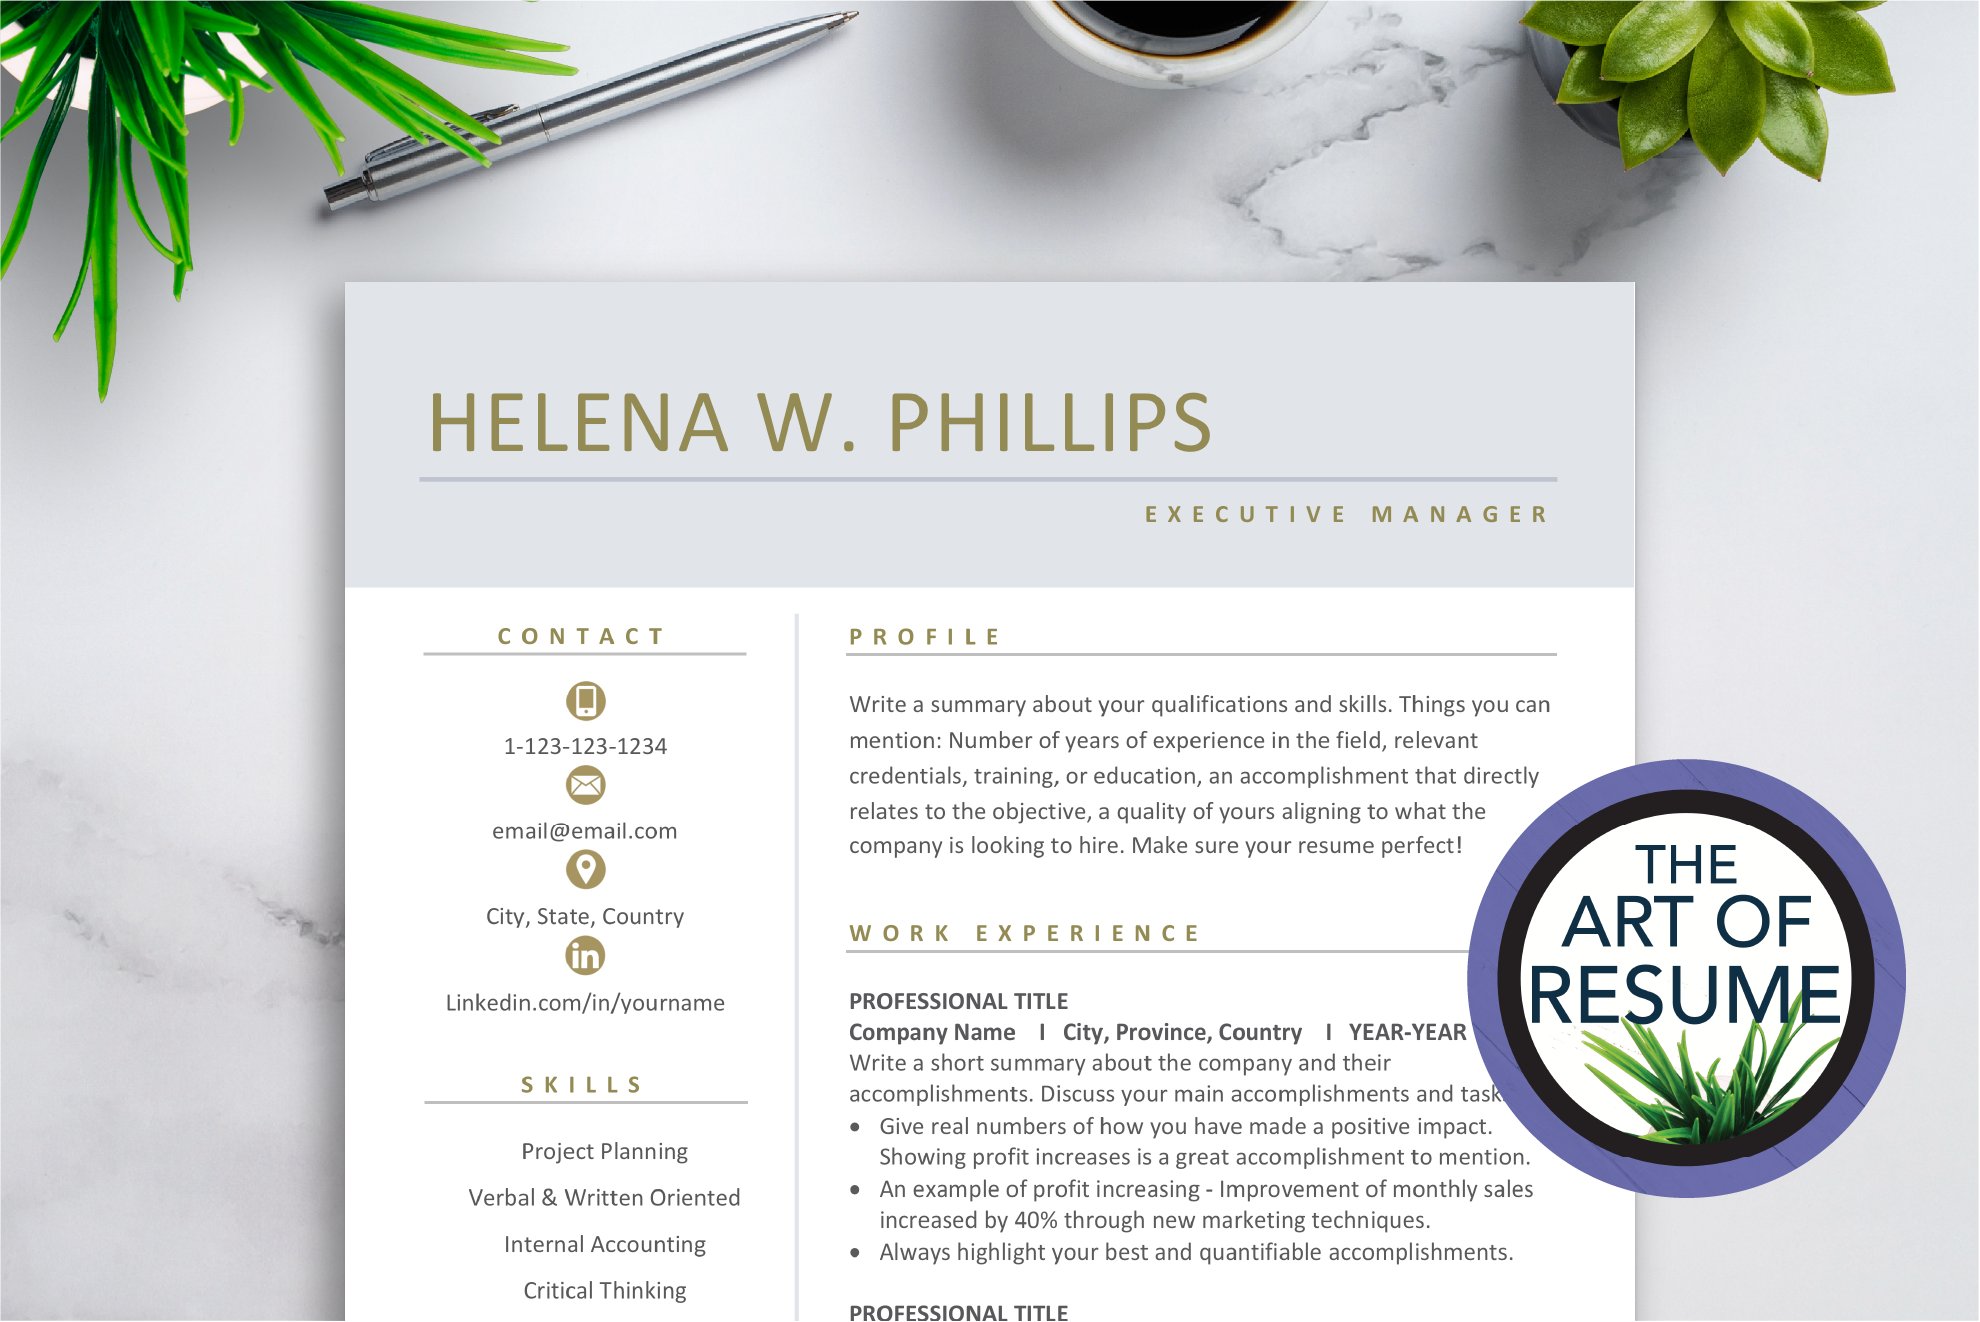 Resume CV Template Word & Mac Pages cover image.